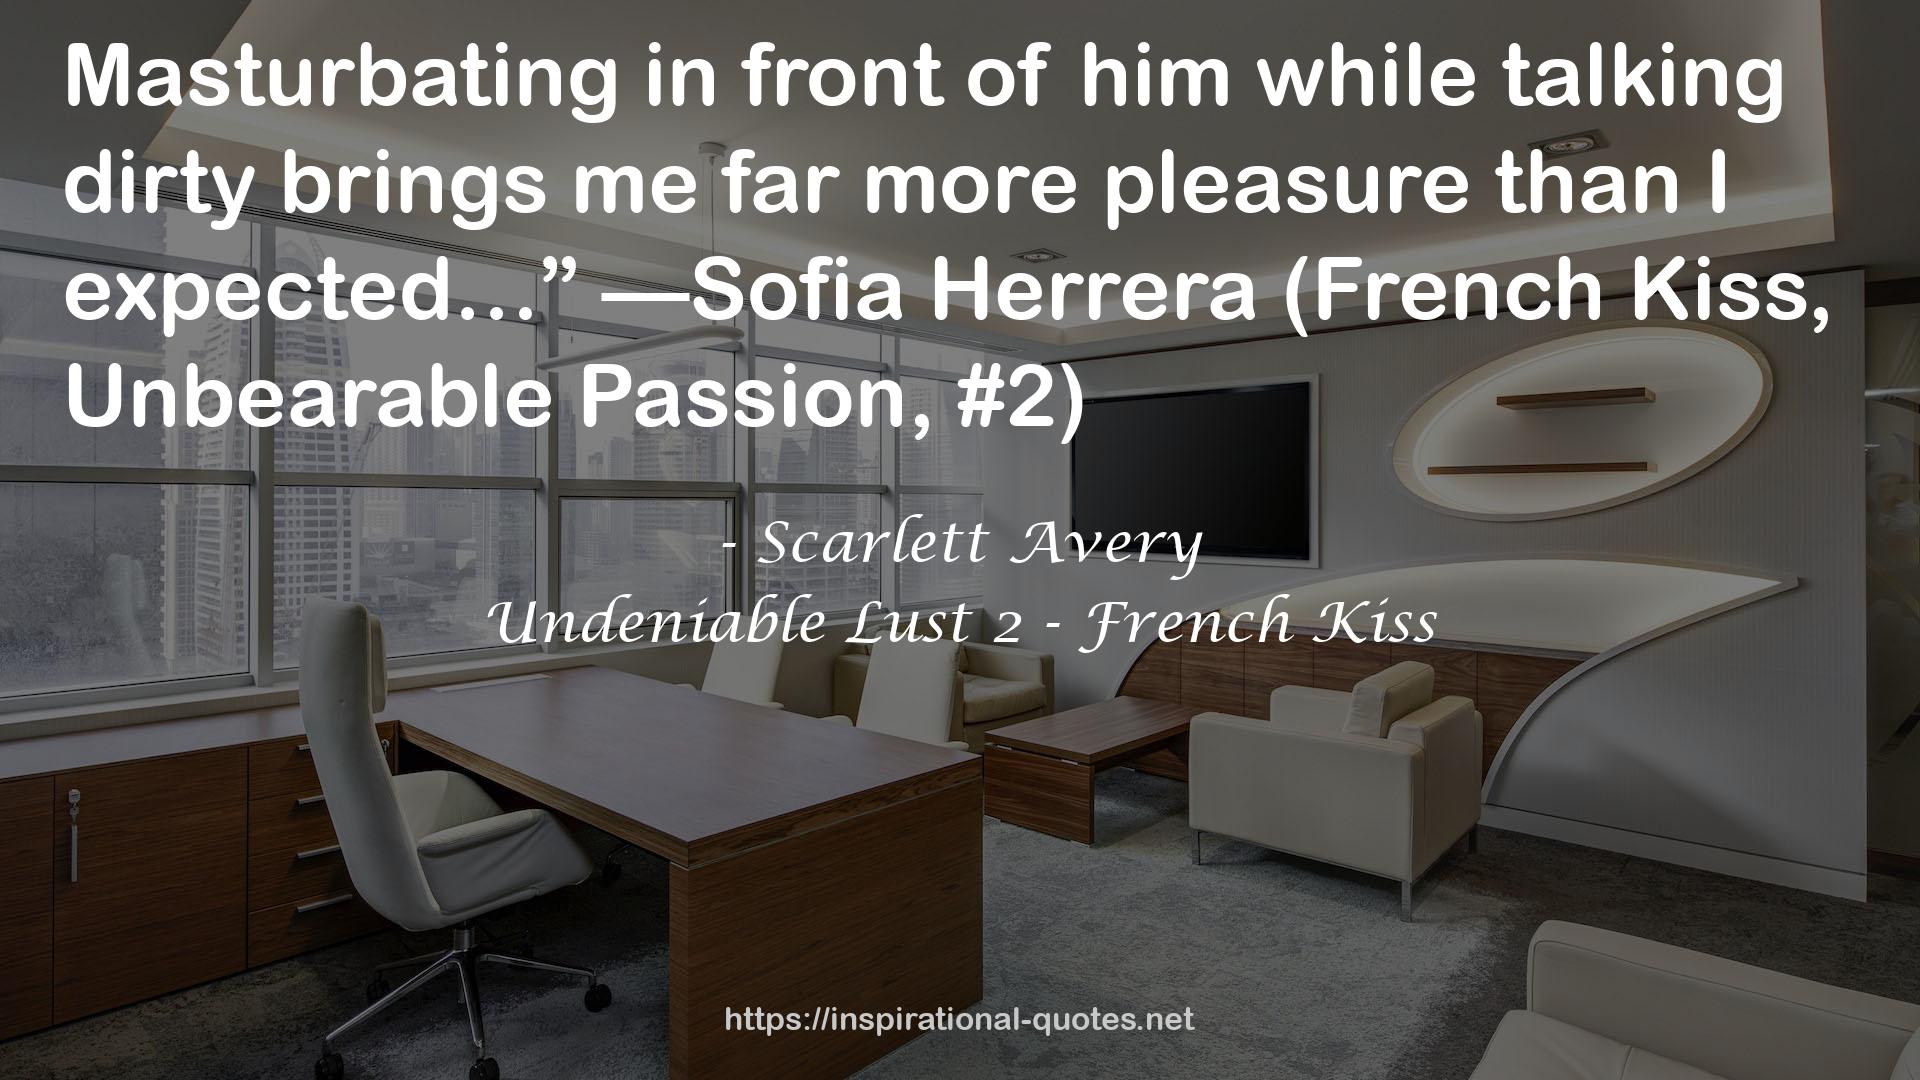 Undeniable Lust 2 - French Kiss QUOTES